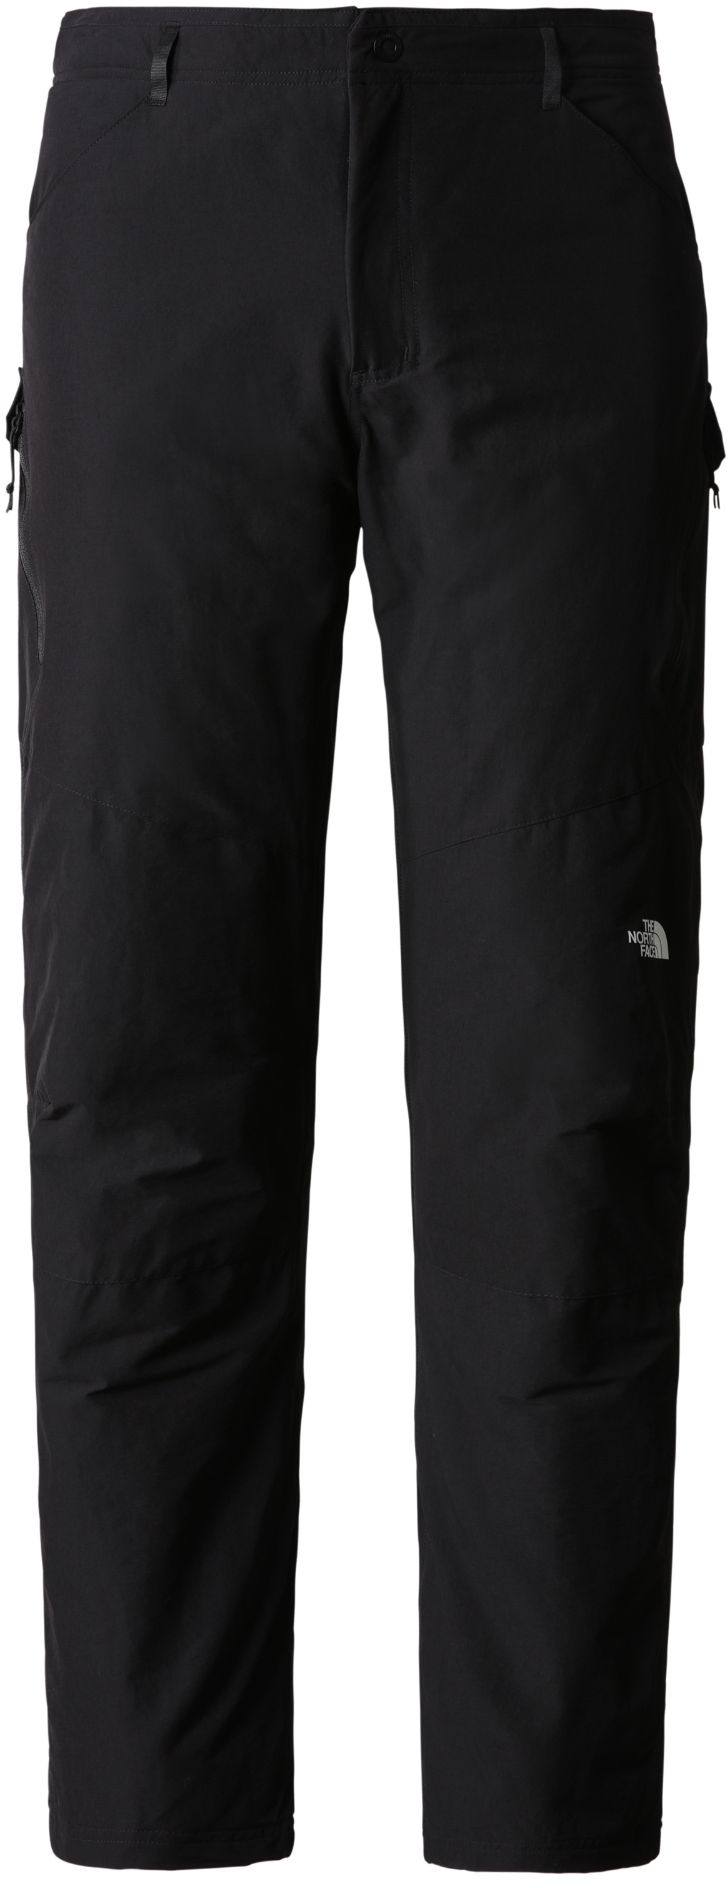 The North Face Men’s Winter Exploration Cargo Pant